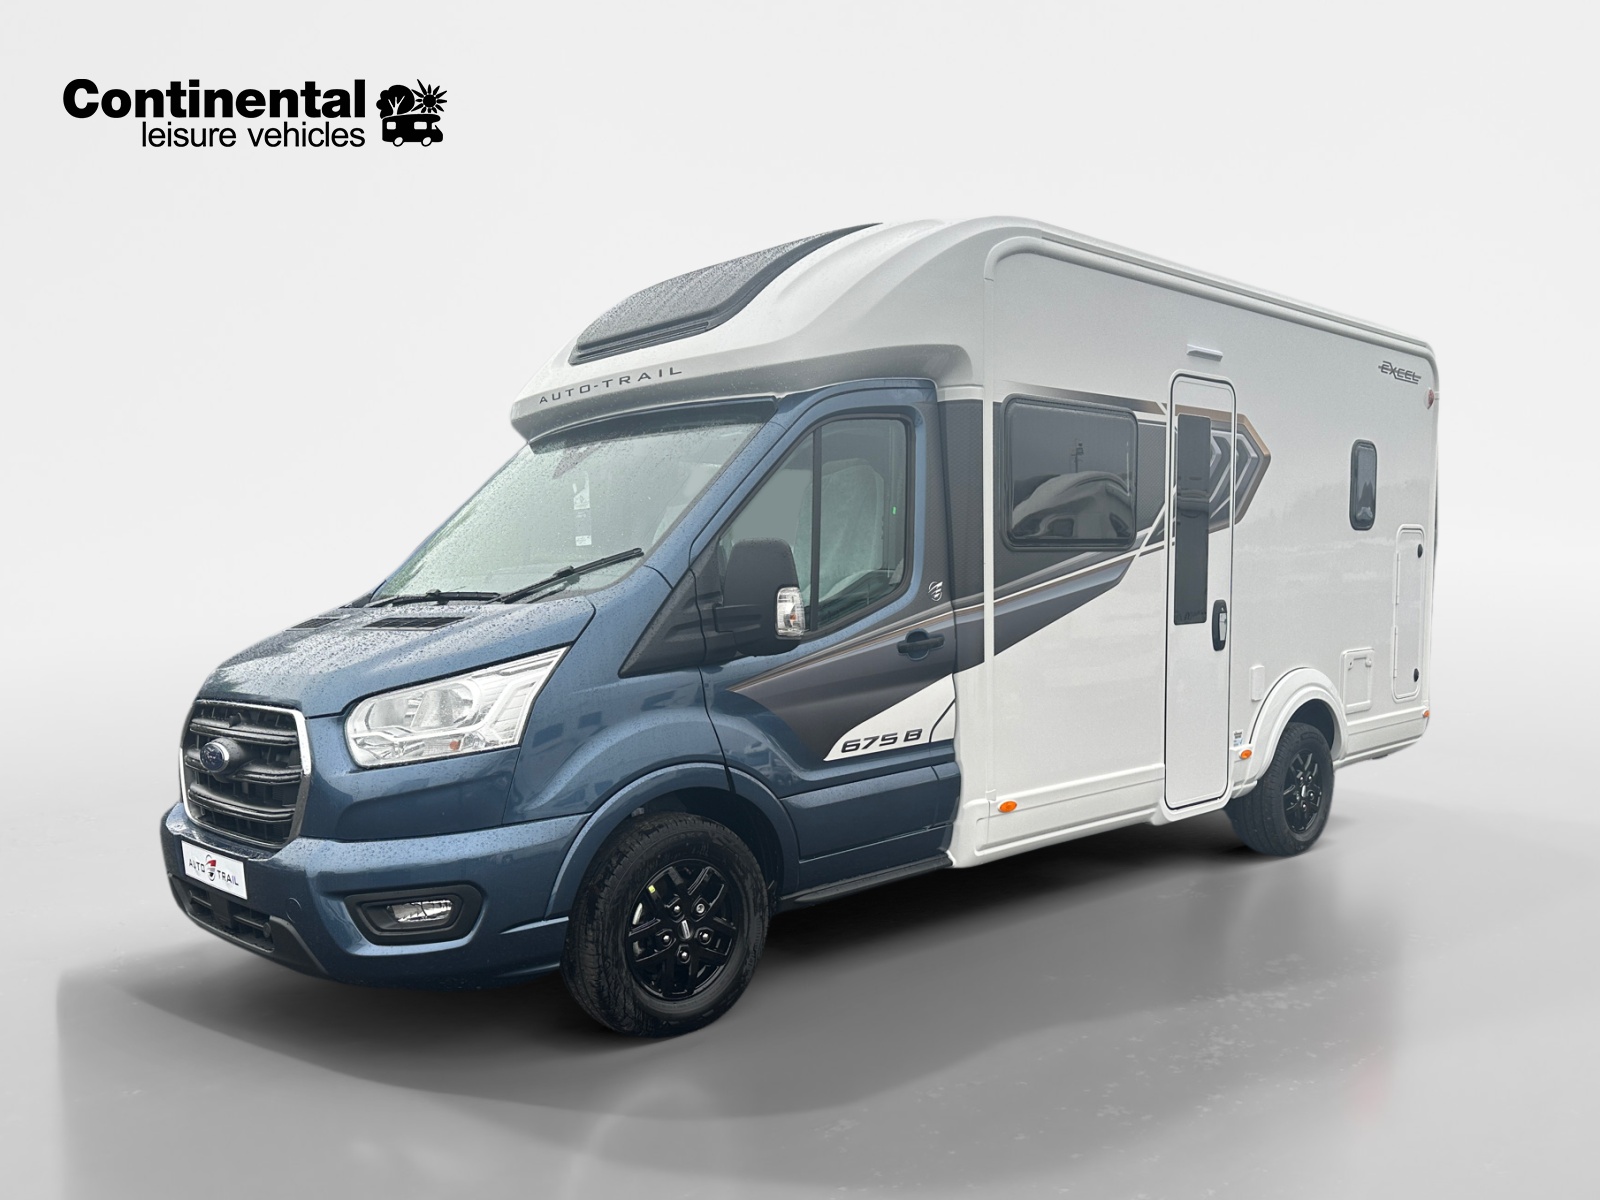 Picture of Auto-Trail Excel 675B